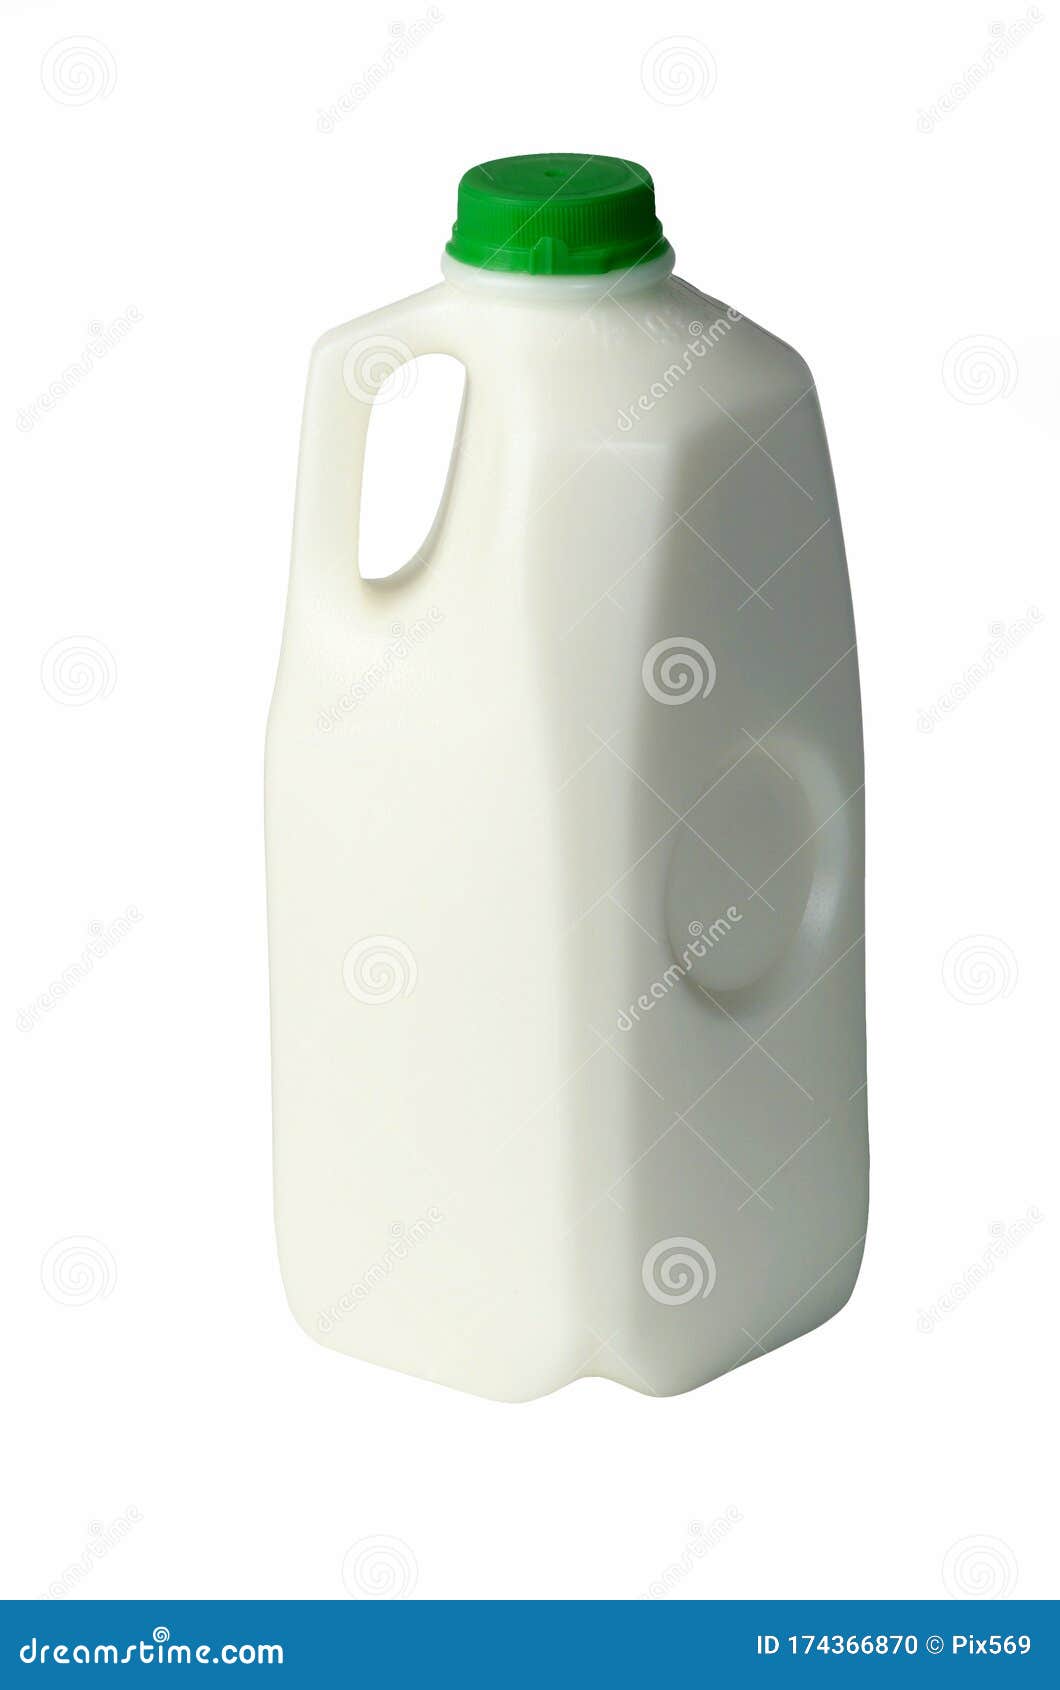 A One Half 1 2 Gallon Jug Of Butter Milk With A Green Cap Stock Photo Image Of Nutrient Nutrition